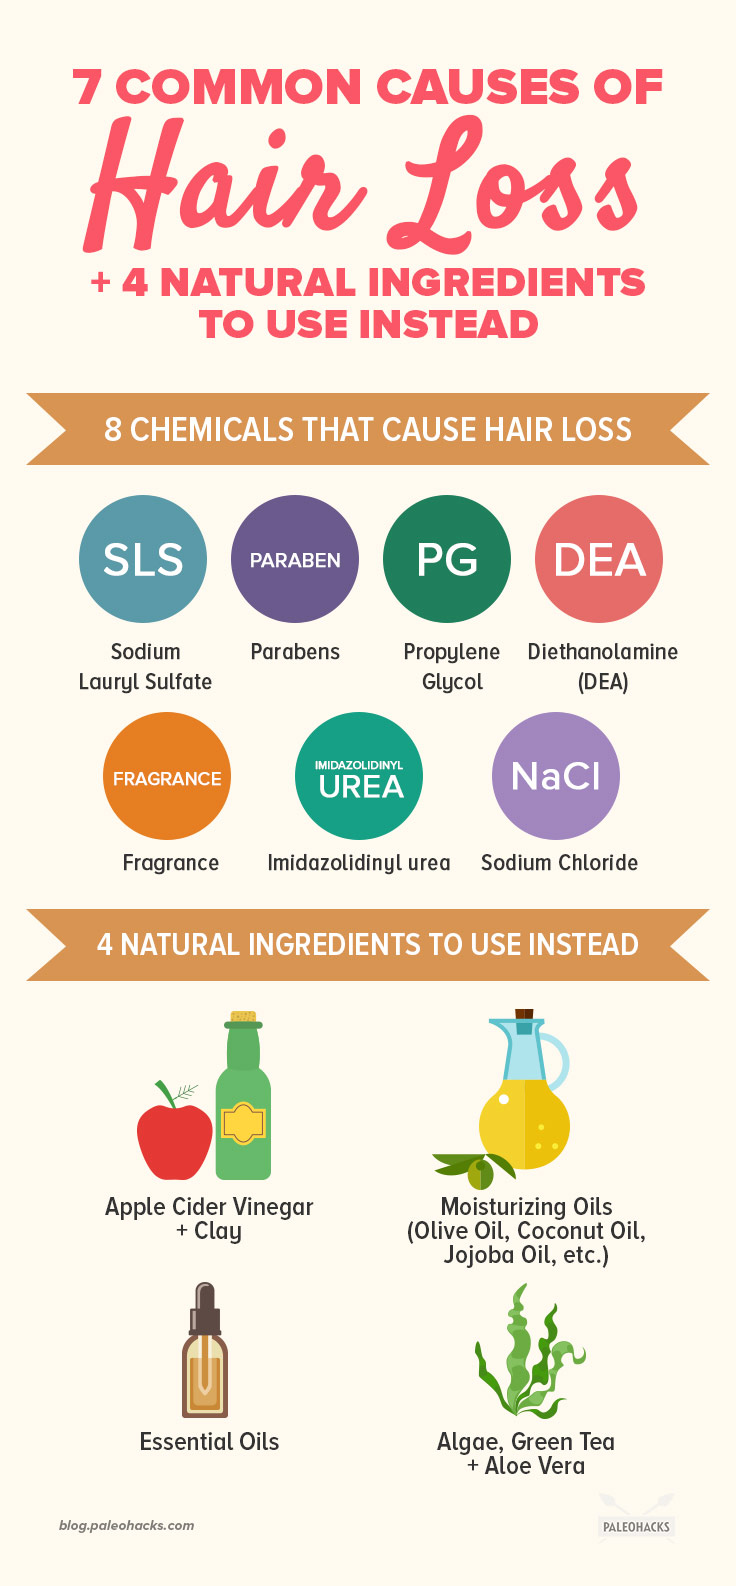 If you’re concerned about recent hair loss, your shampoo might be to blame. Here are the common chemical culprits you’re probably using.